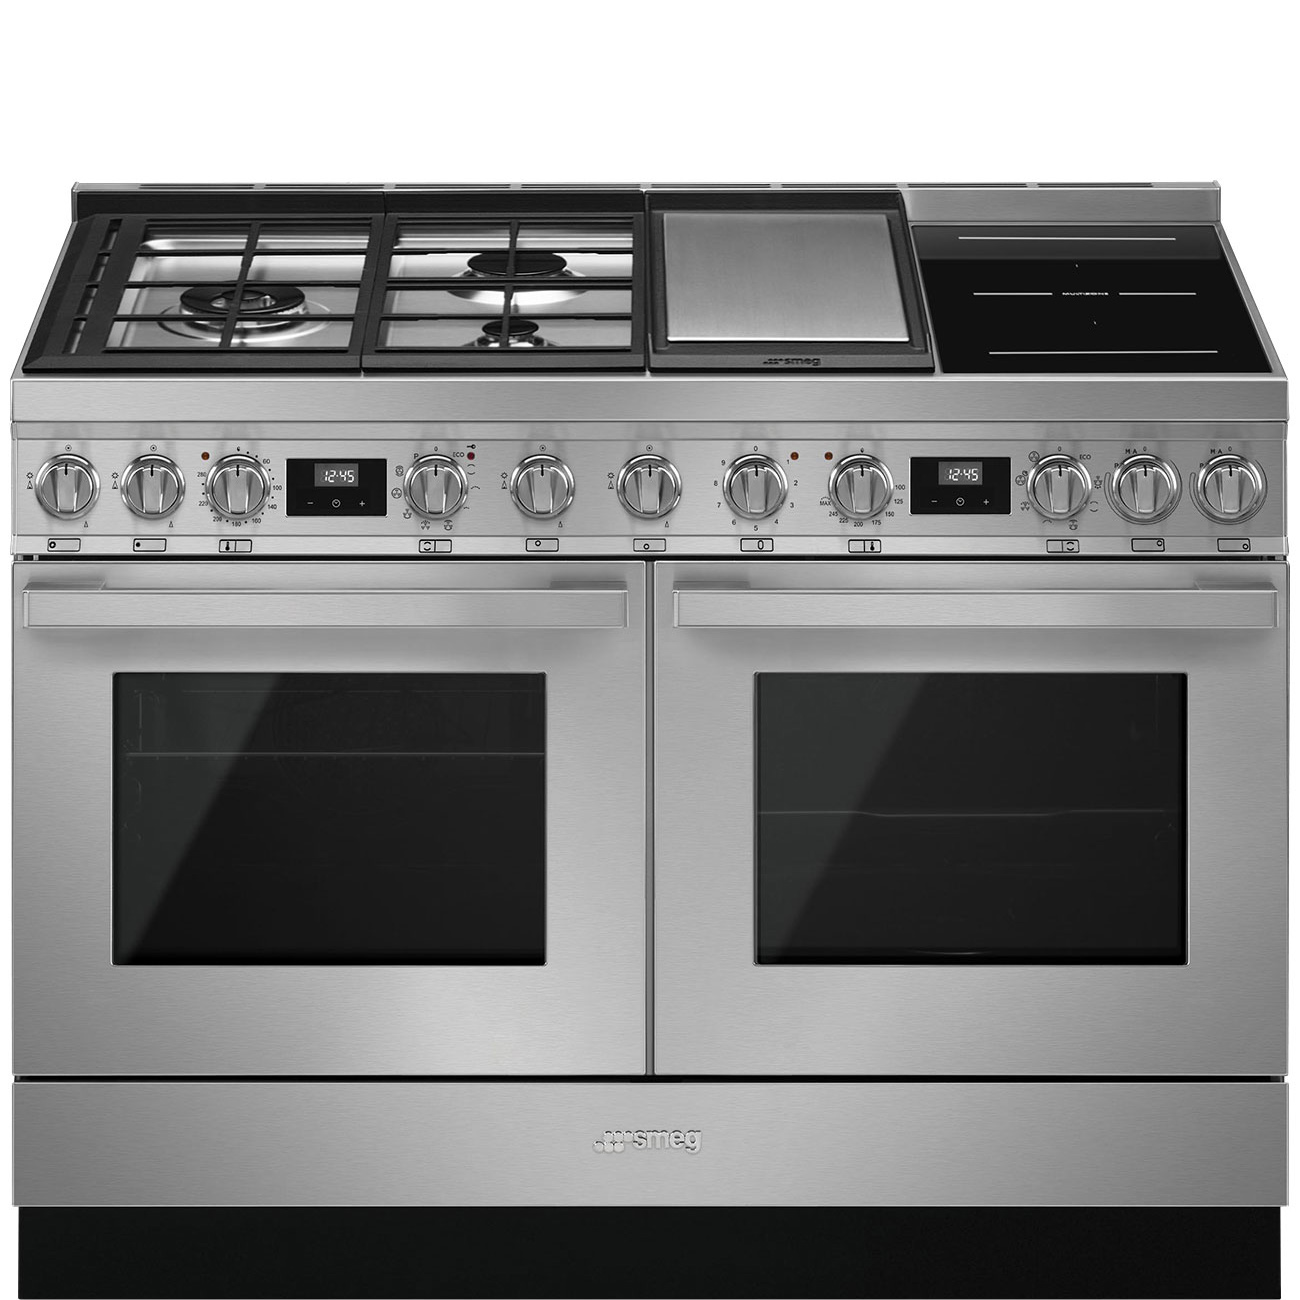 Smeg Stainless steel Cooker with Mixed Hob_1